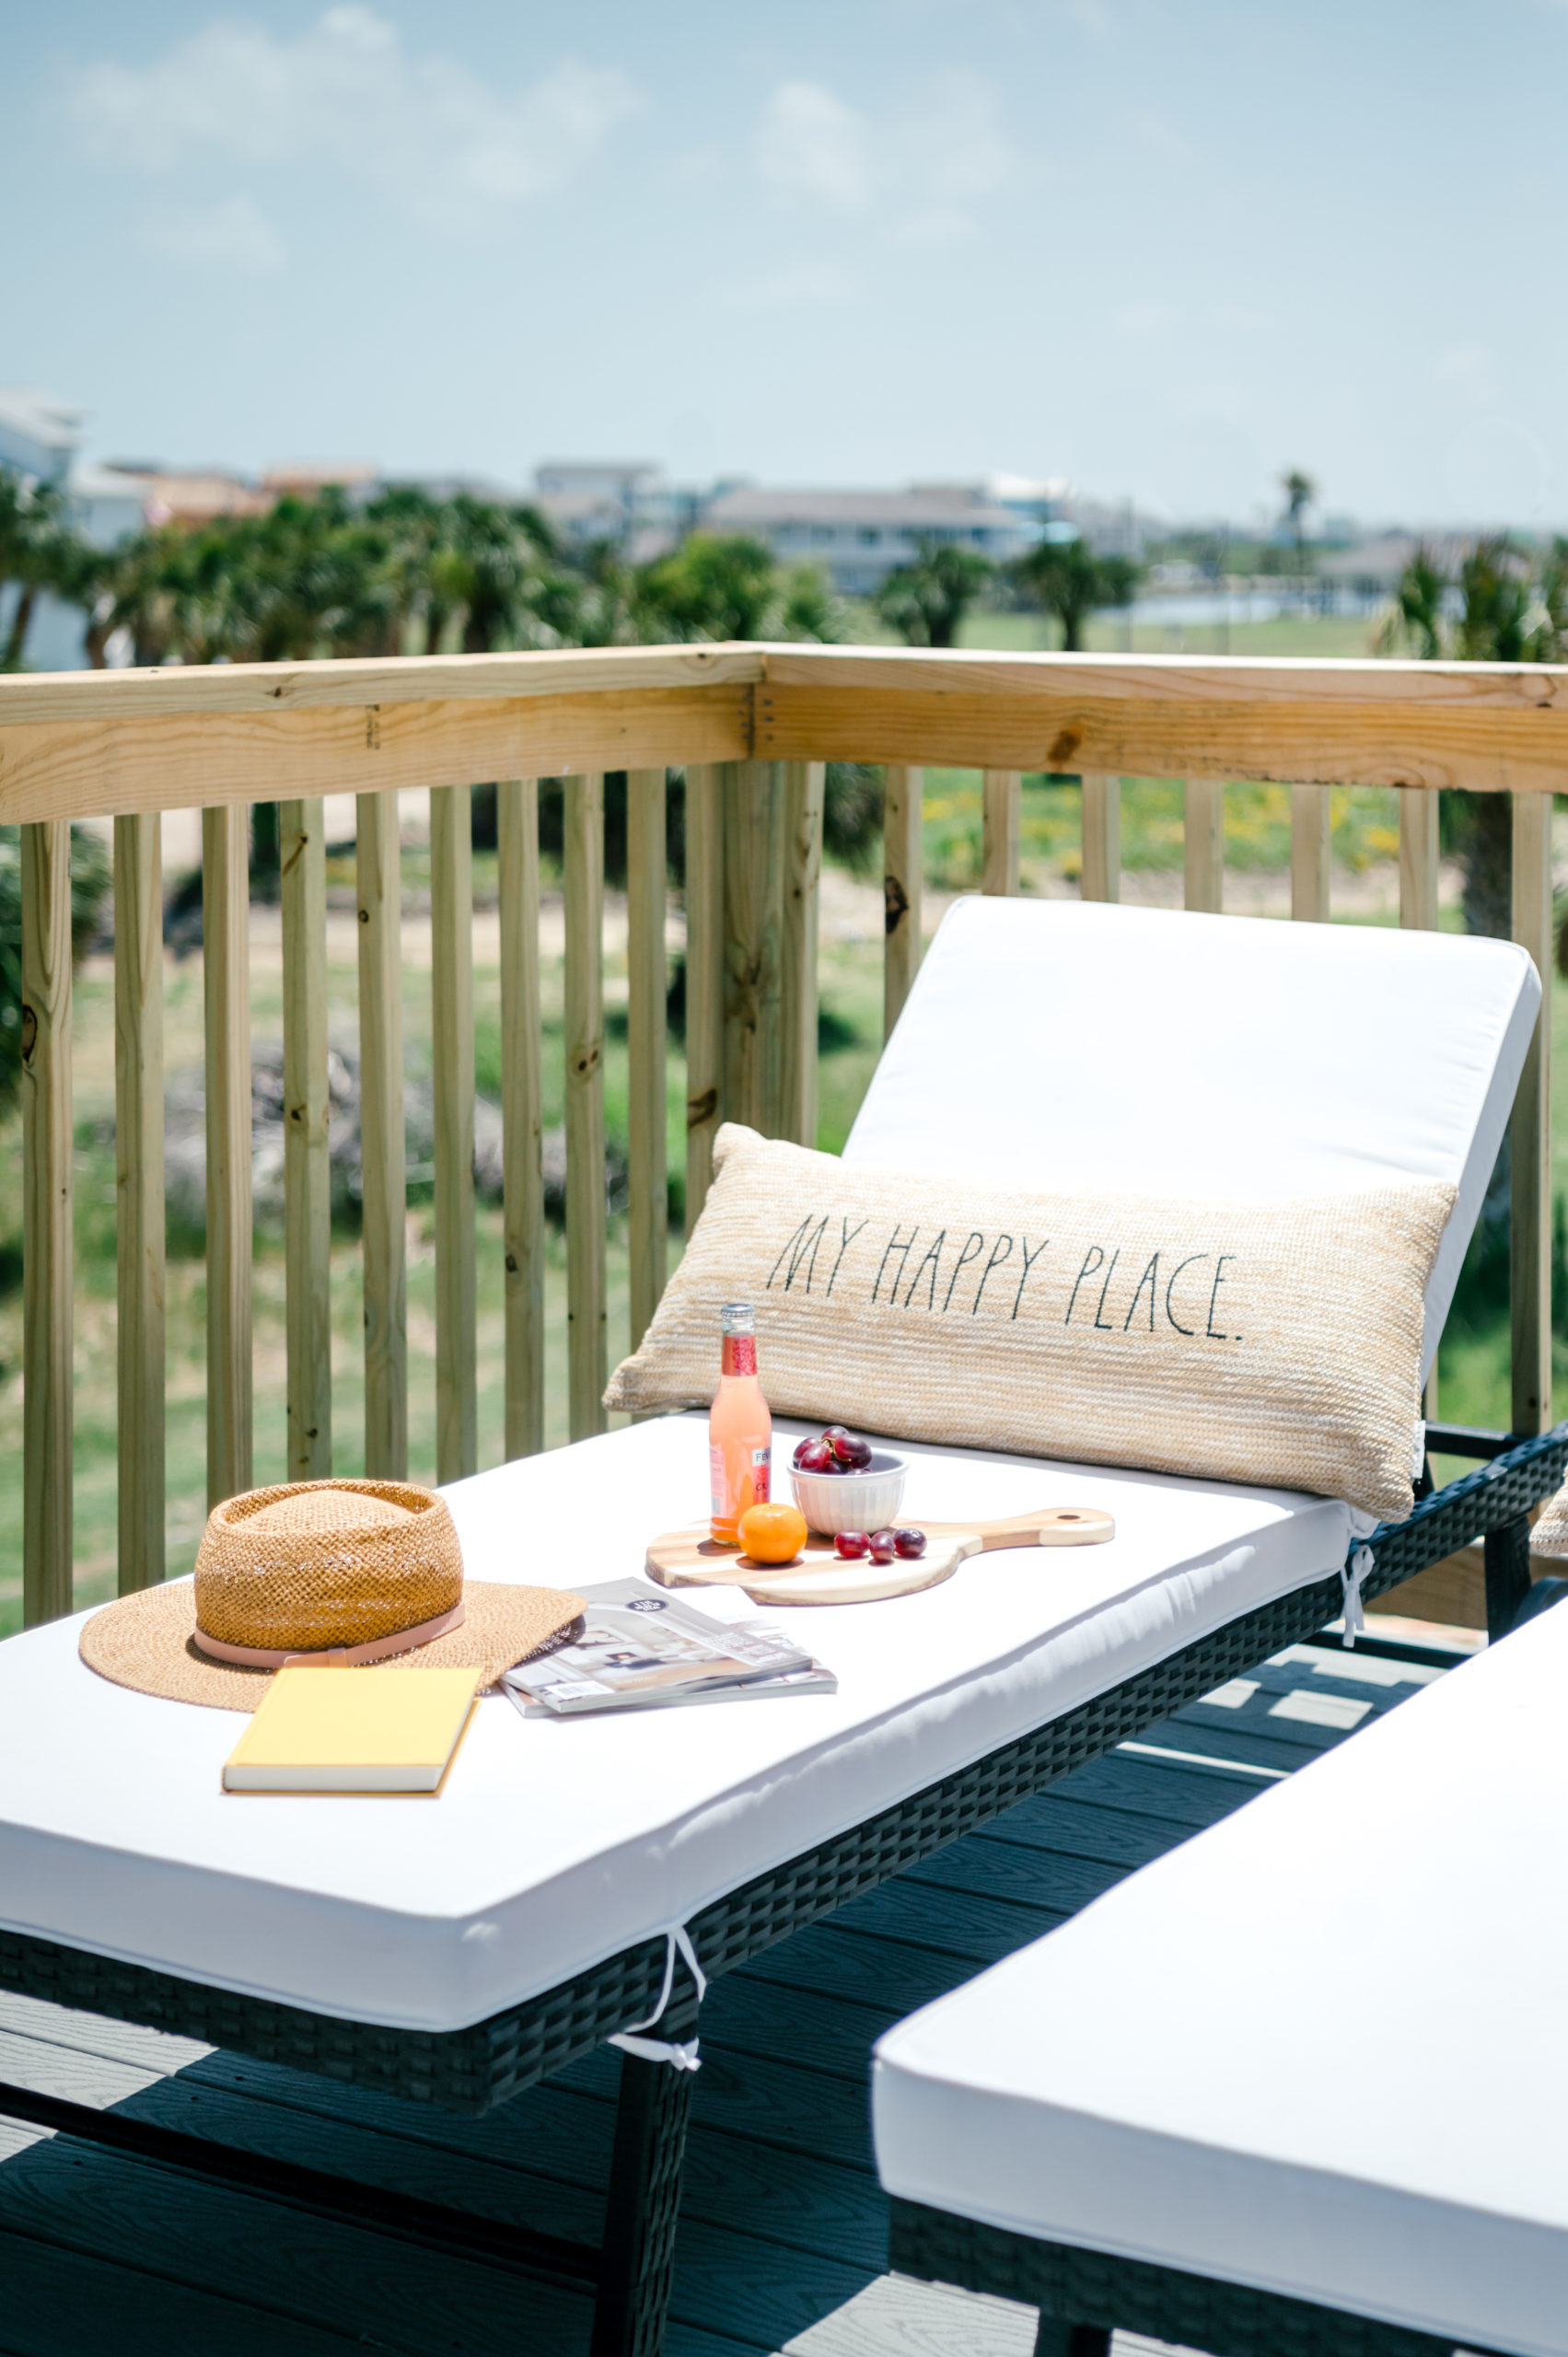 Outdoor lounge chairs with tan pillows reading "Happy place" sitting on the balcony